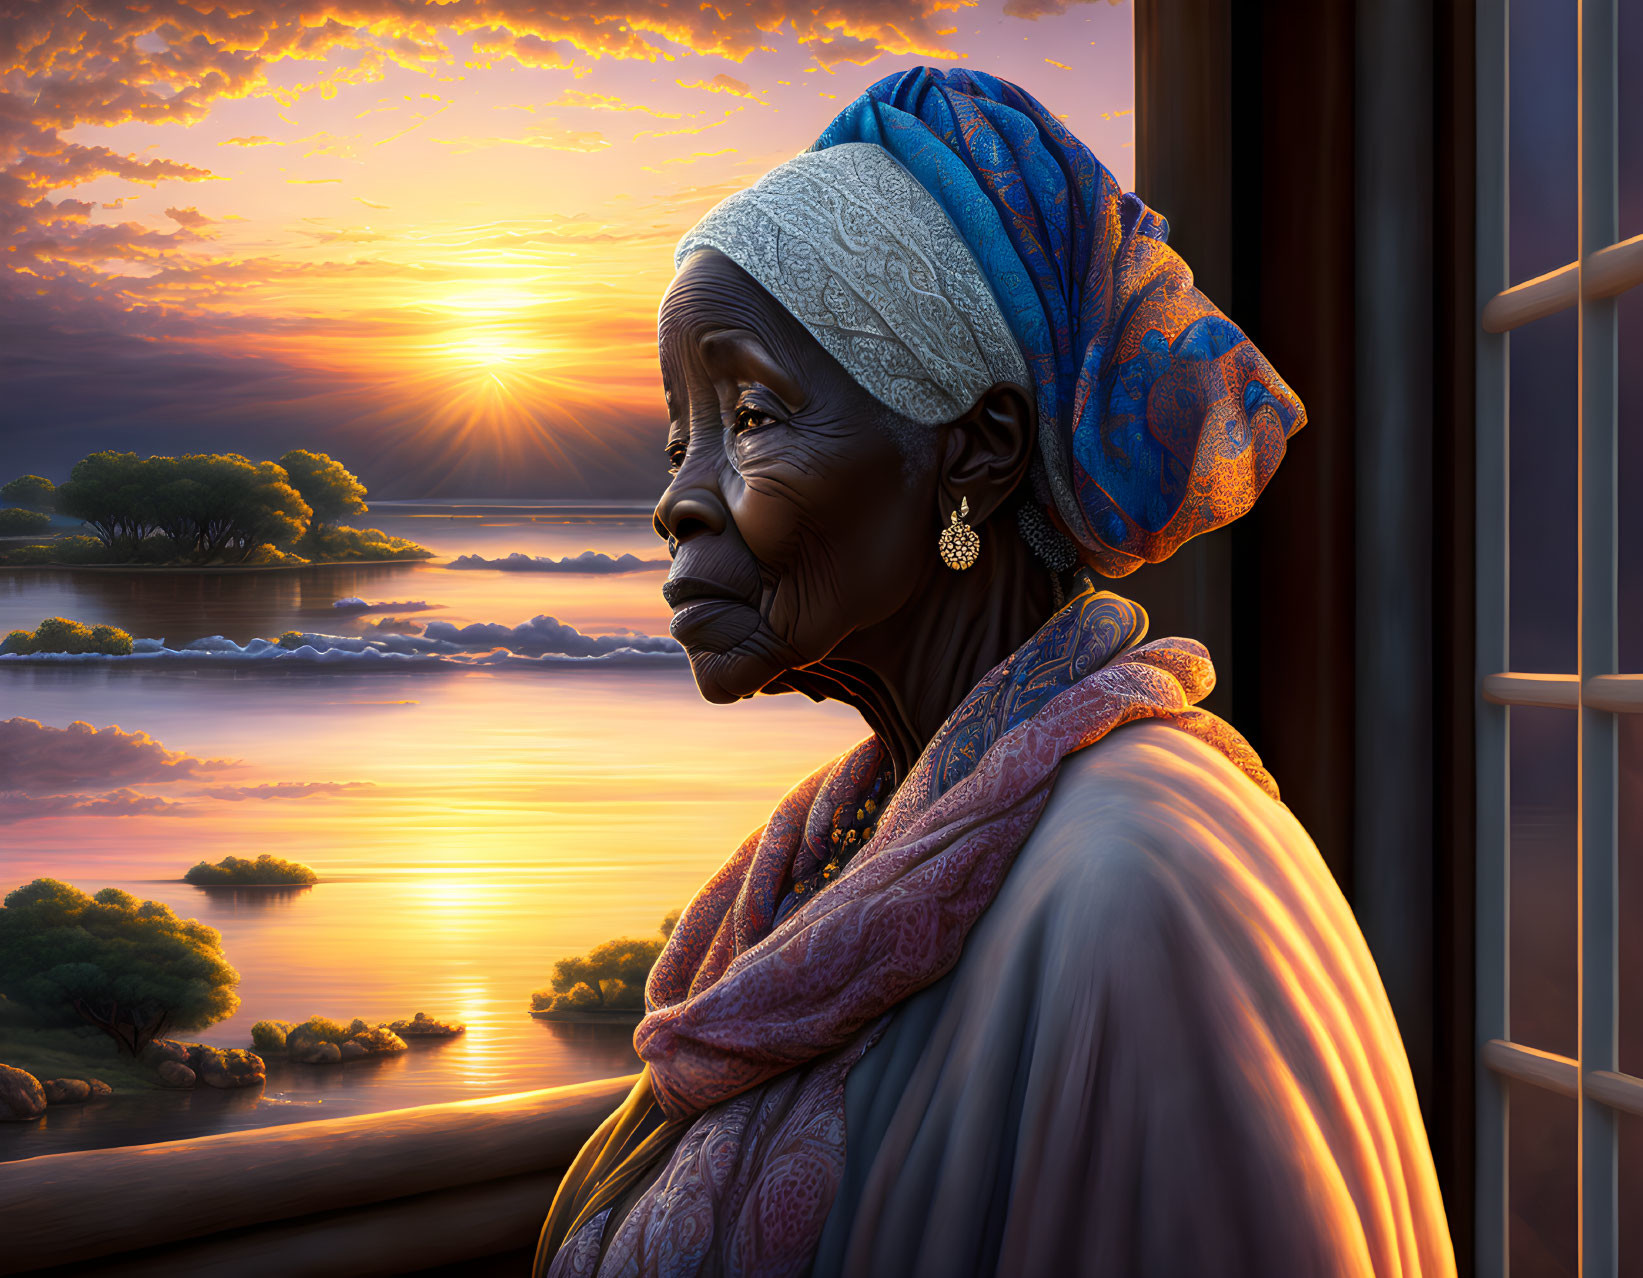 Elderly Woman Contemplating Sunset by River